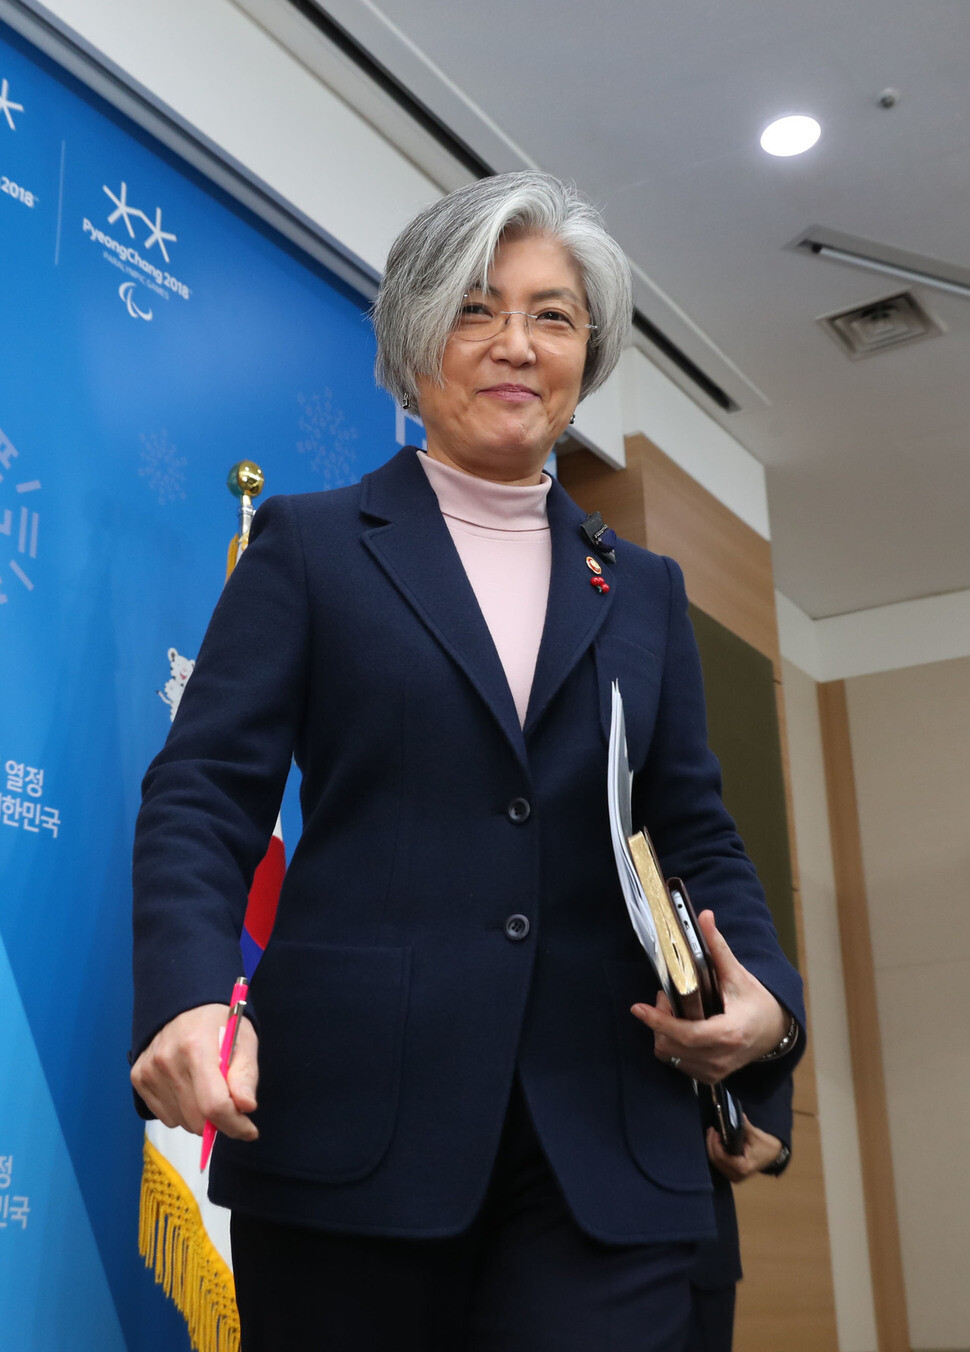 Foreign Minister Kang Kyung-wha smiles as she leaves a press briefing at the Foreign Ministry headquarters in the Jongno District of Seoul on Dec. 26. (by Shin So-young